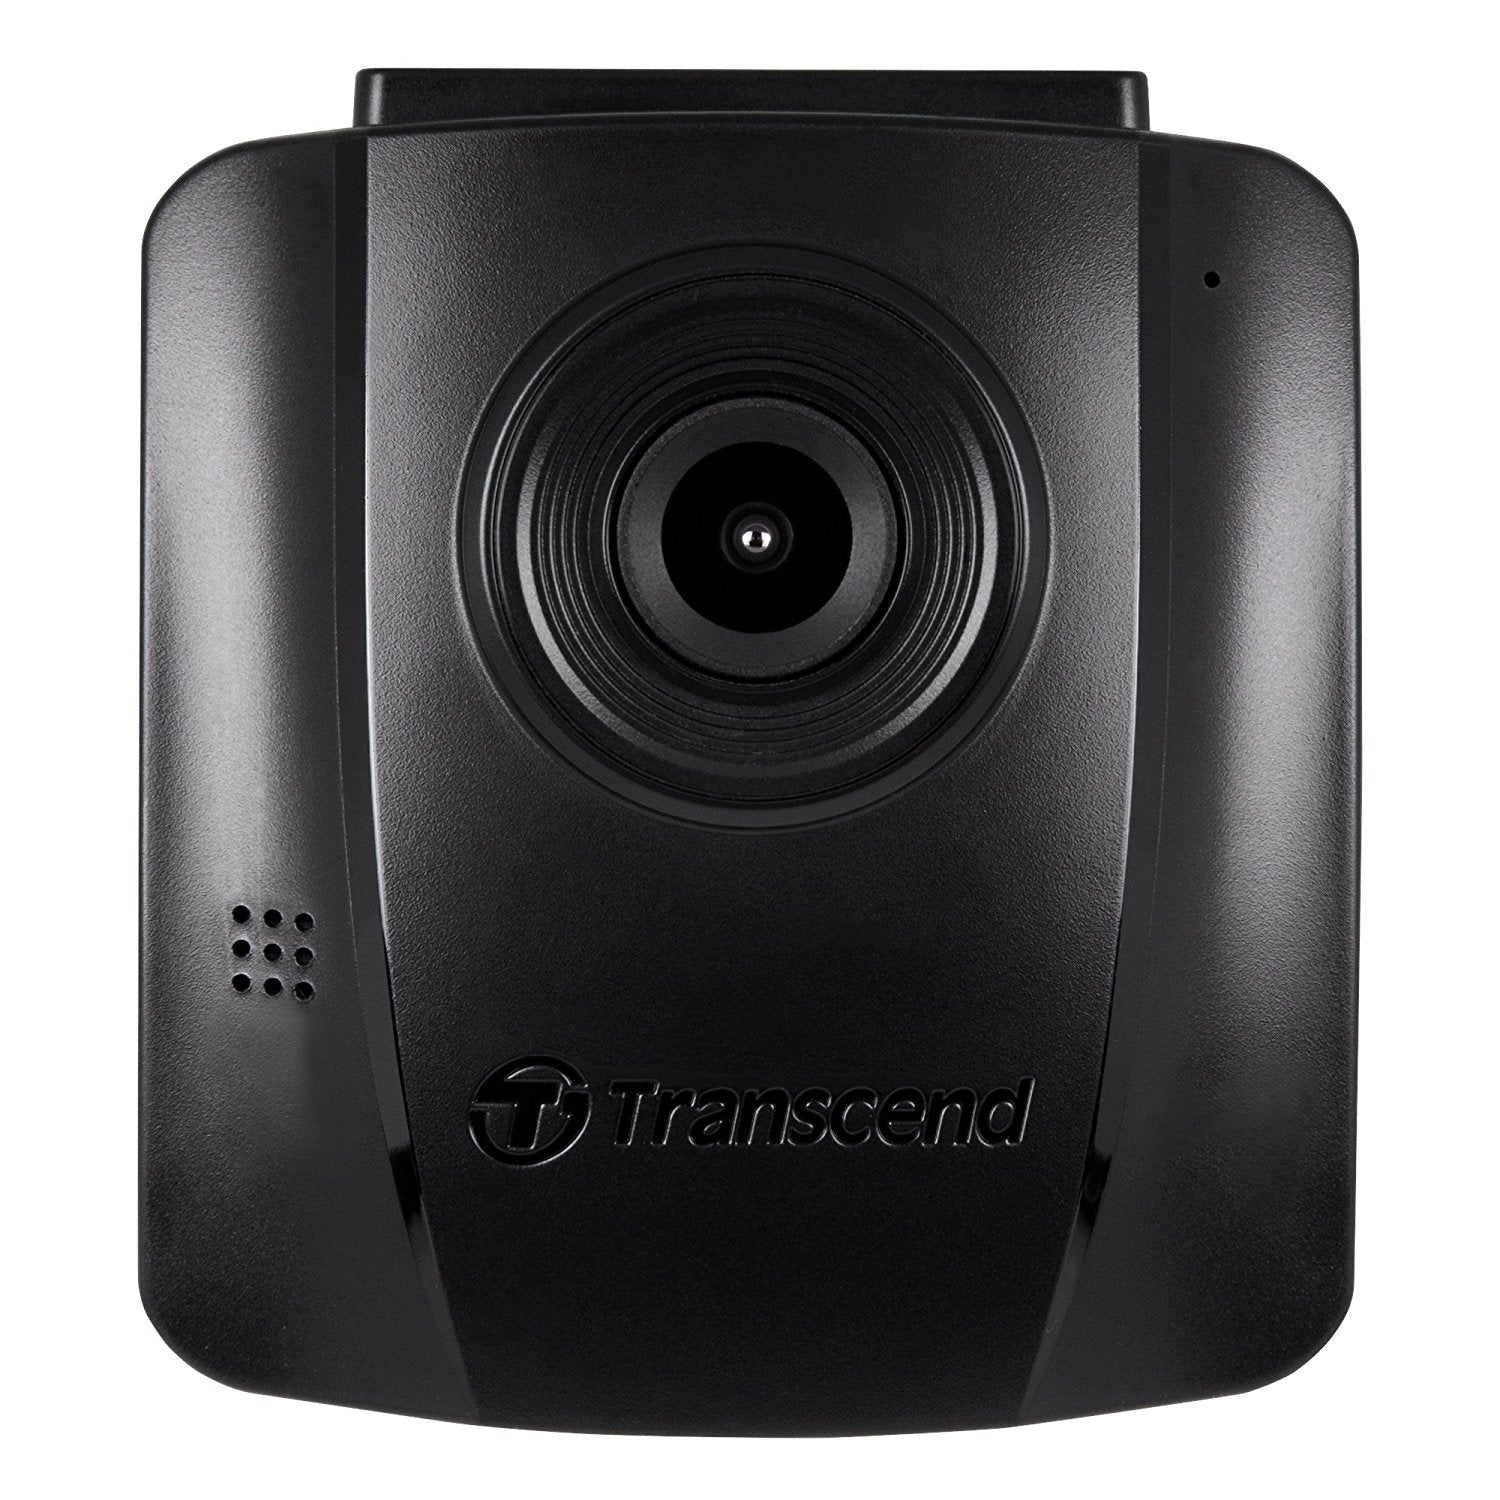 Transcend 16G DrivePro 110, 2.4" LCD, with Suction Mount - SILBERSHELL